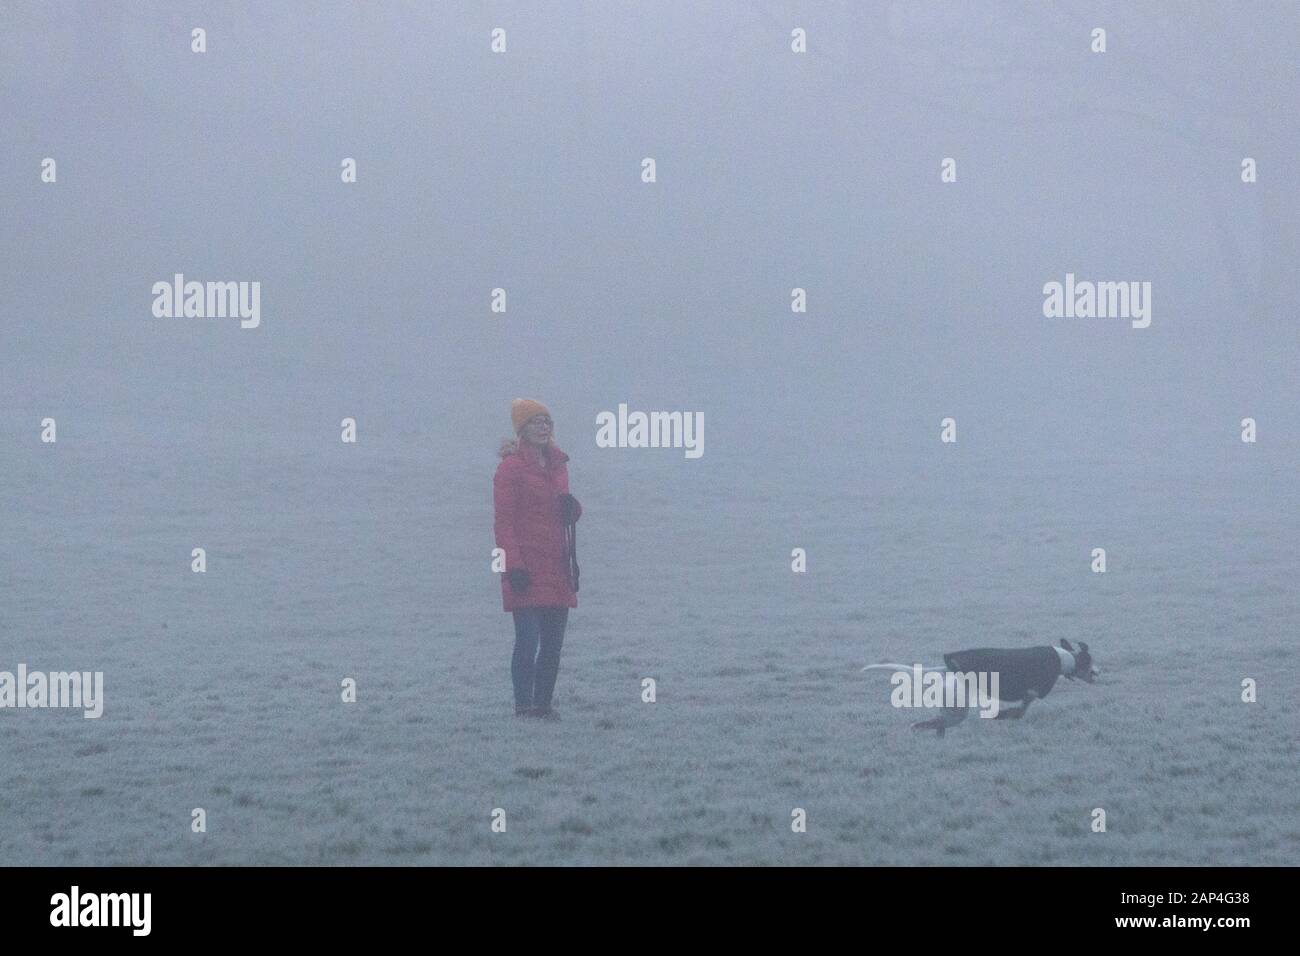 Chippenham, Wiltshire, UK. 21st Jan, 2020. As fog blankets many parts of the UK , a woman is pictured watching a dog as it runs in a public park in Chippenham, Wiltshire. Credit: Lynchpics/Alamy Live News Stock Photo